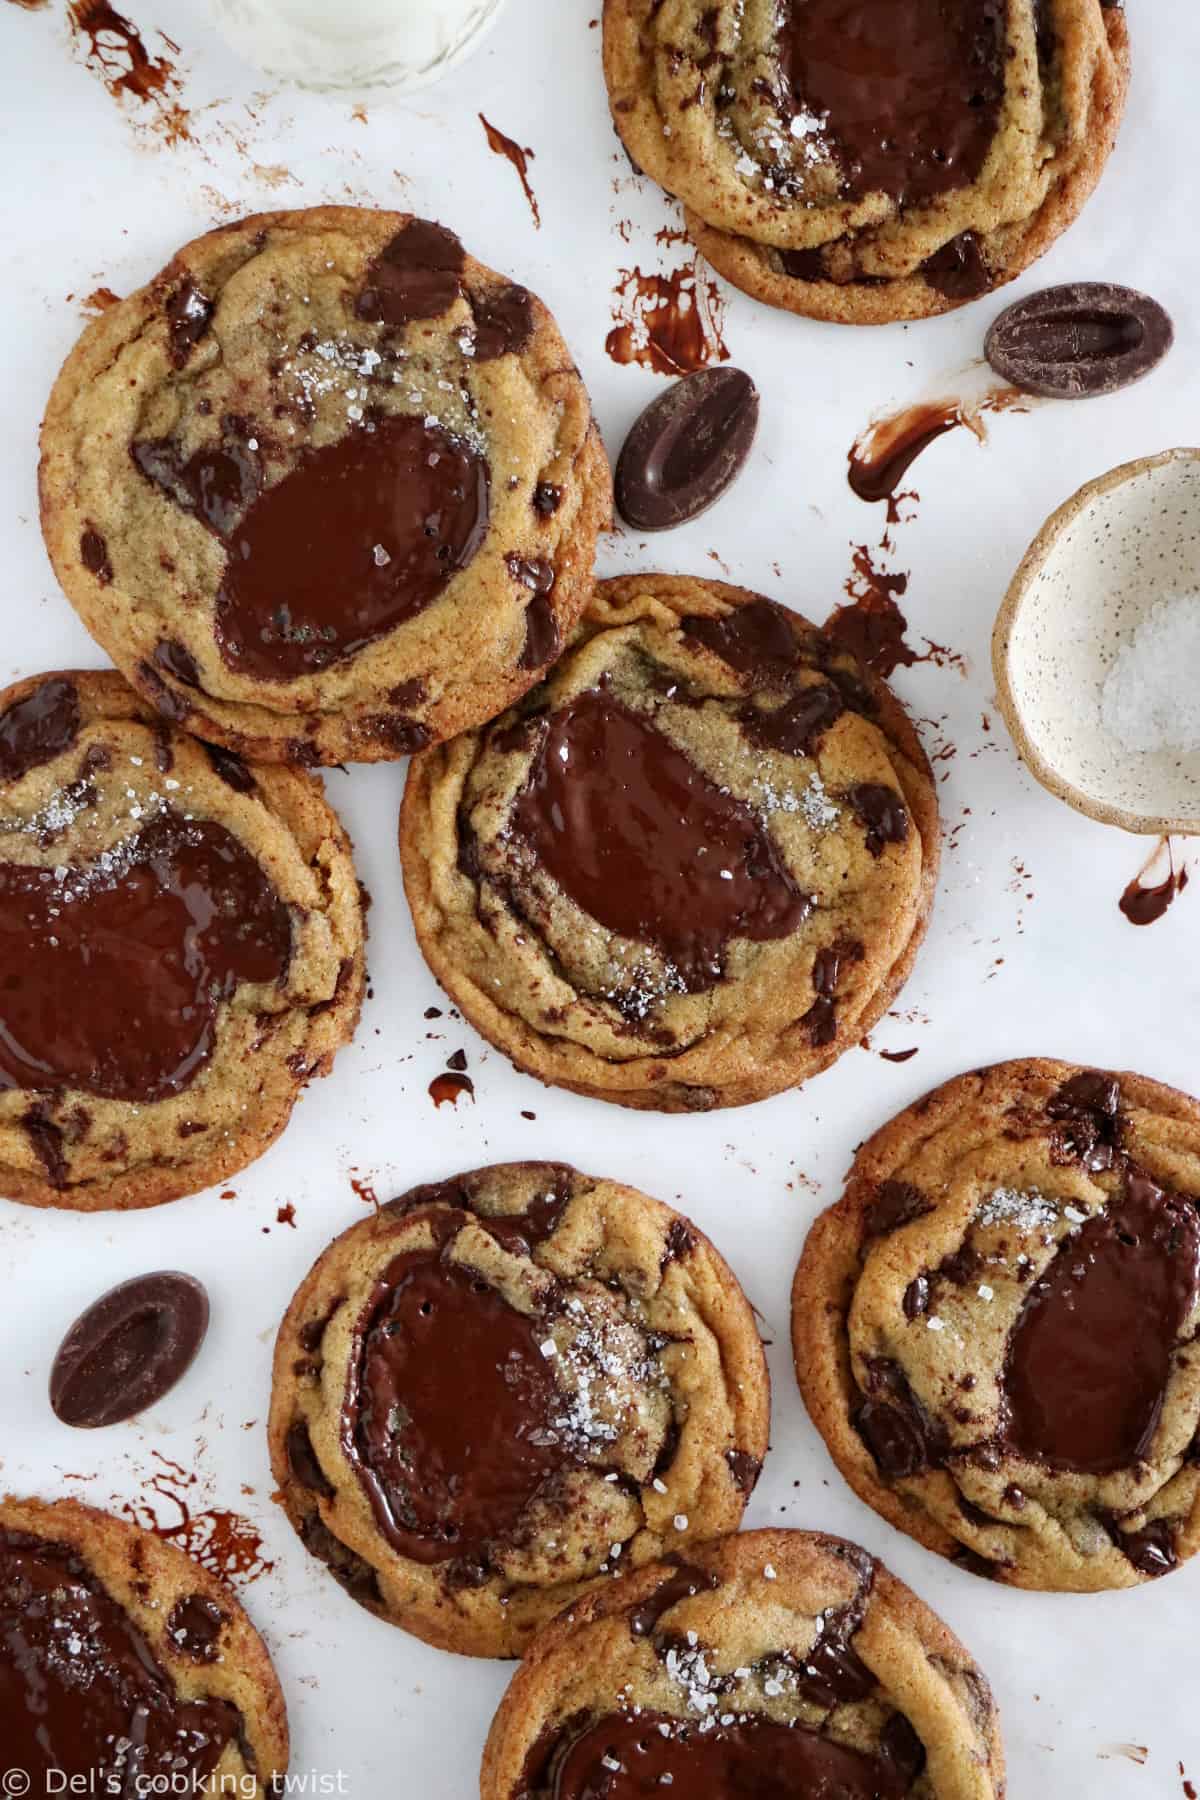 The BEST chocolate chip cookies are soft, buttery, with a slightly puffy, inflated texture, and oozing with melted chocolate puddles.